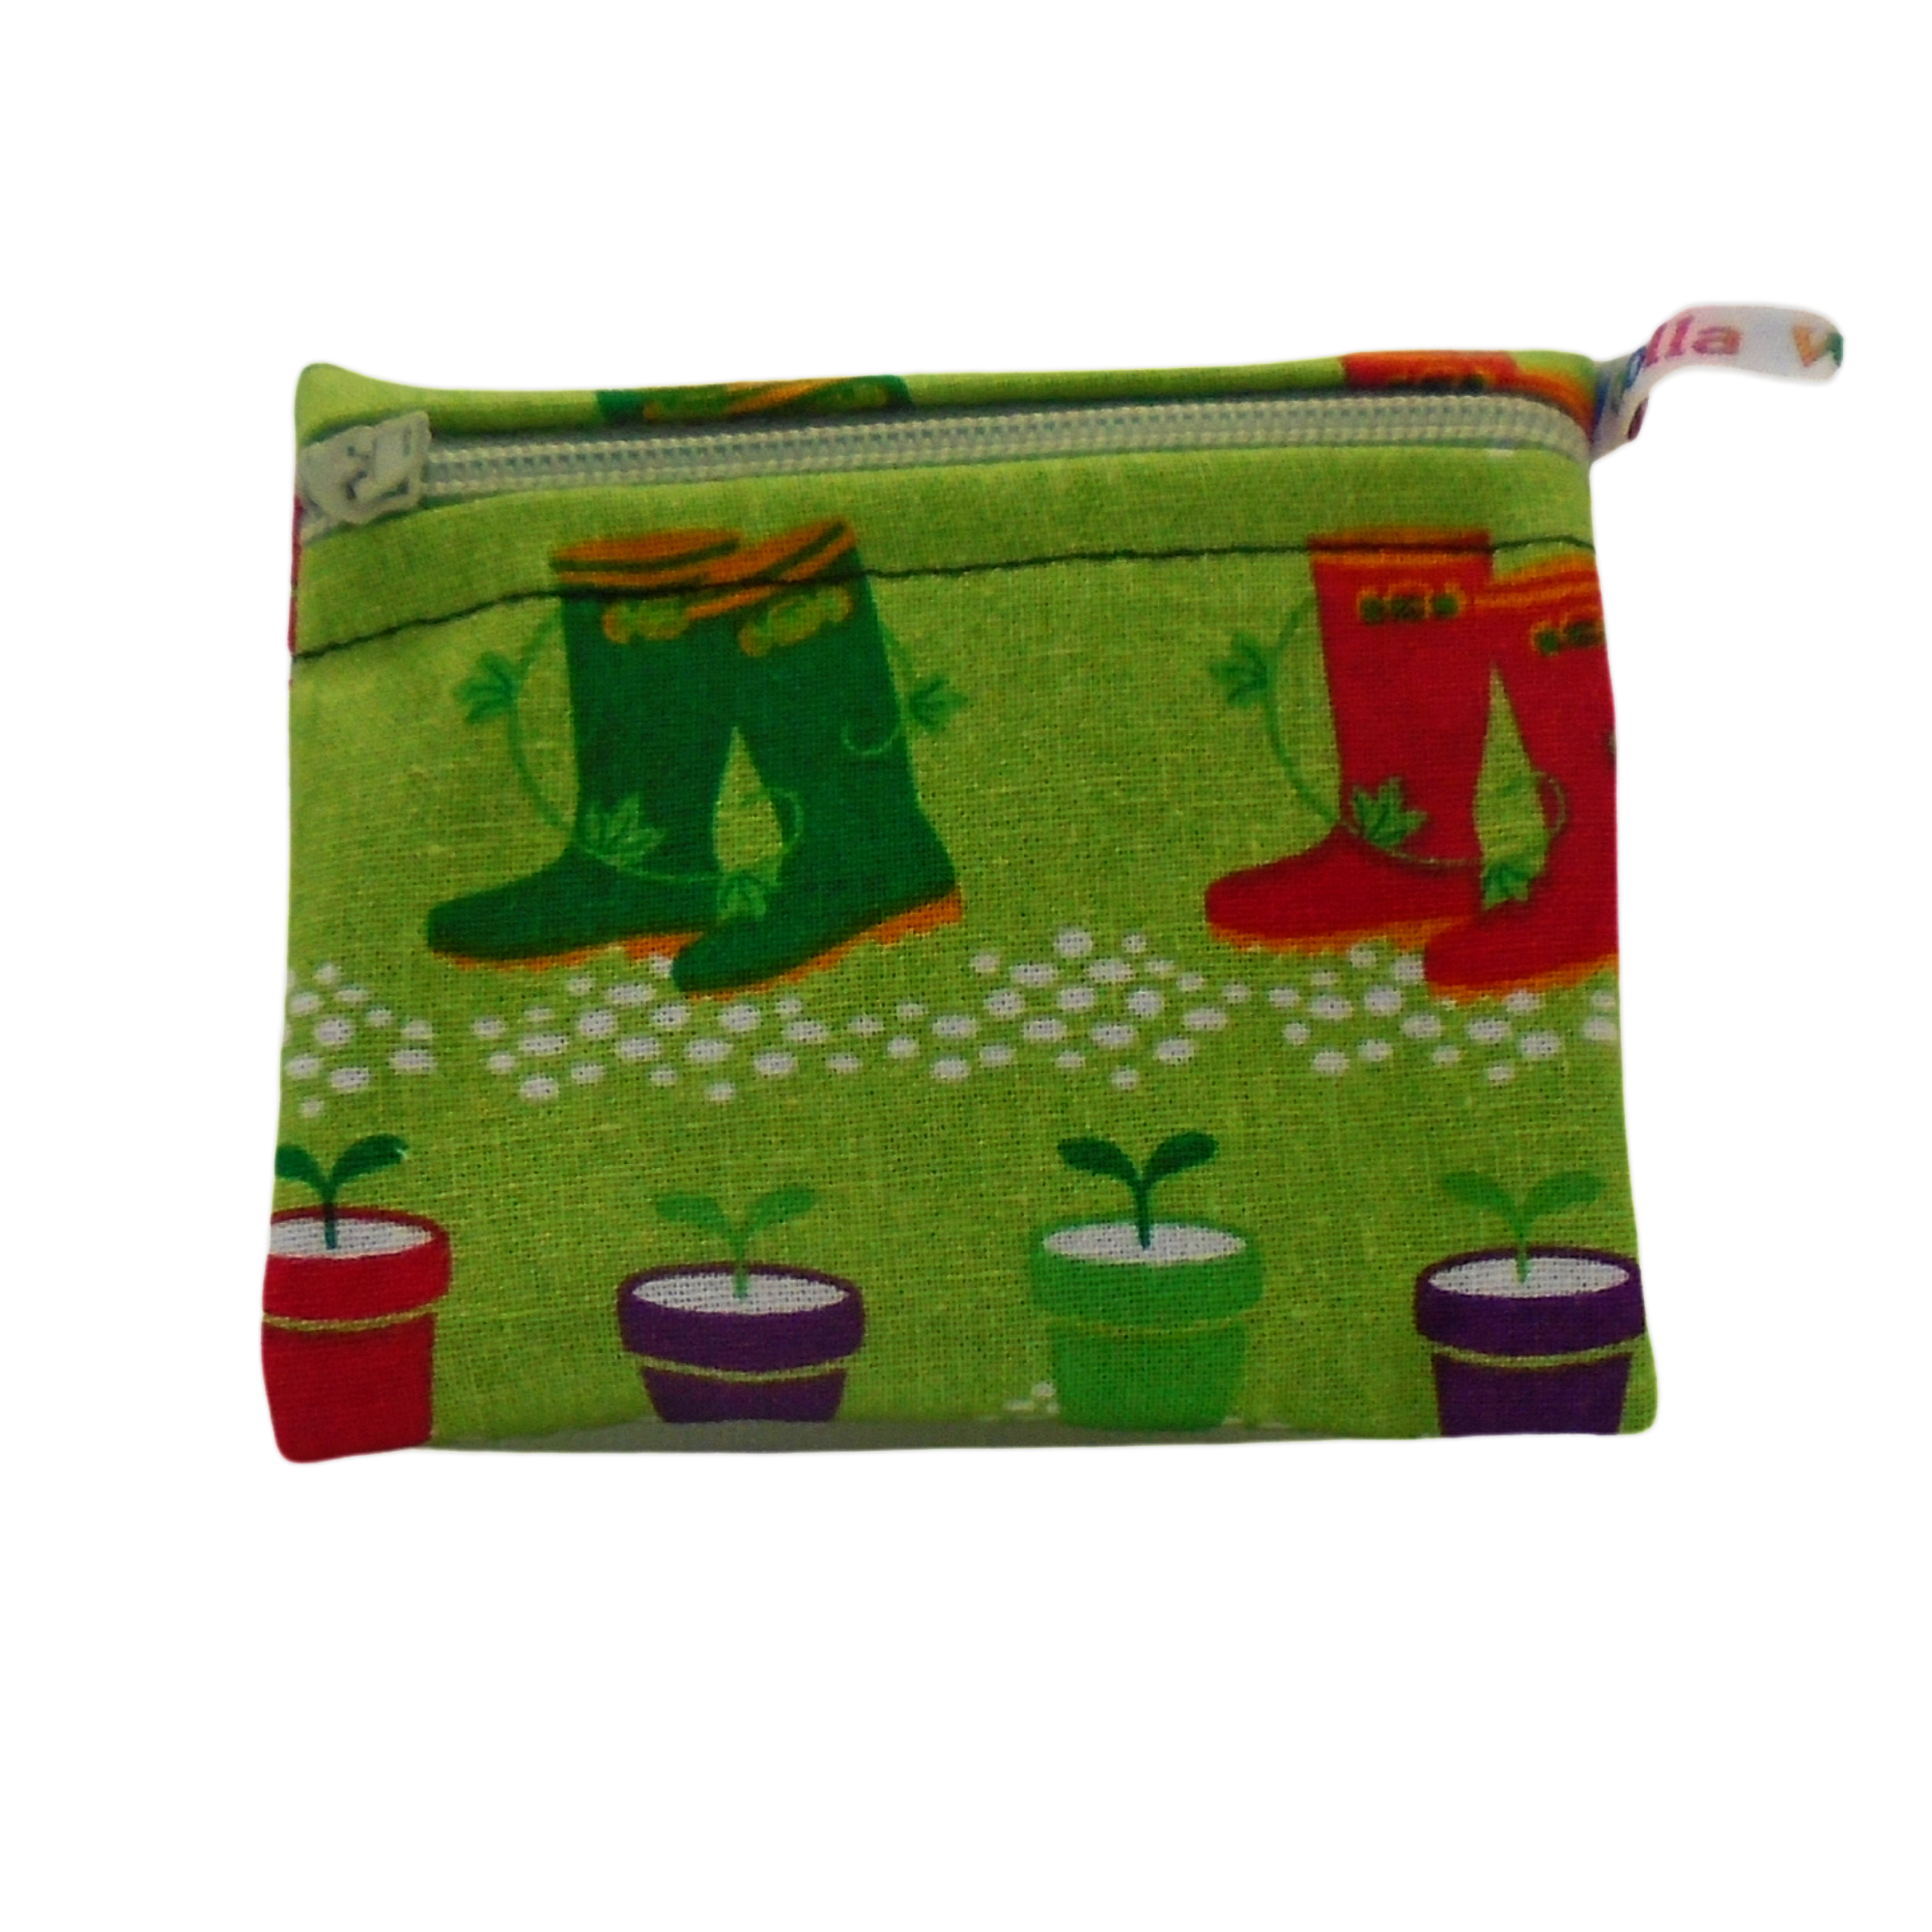 Gardening Wellies - Pippins Poppins Pouch Snack Pouch, Coin Purse, Ear Bud Case